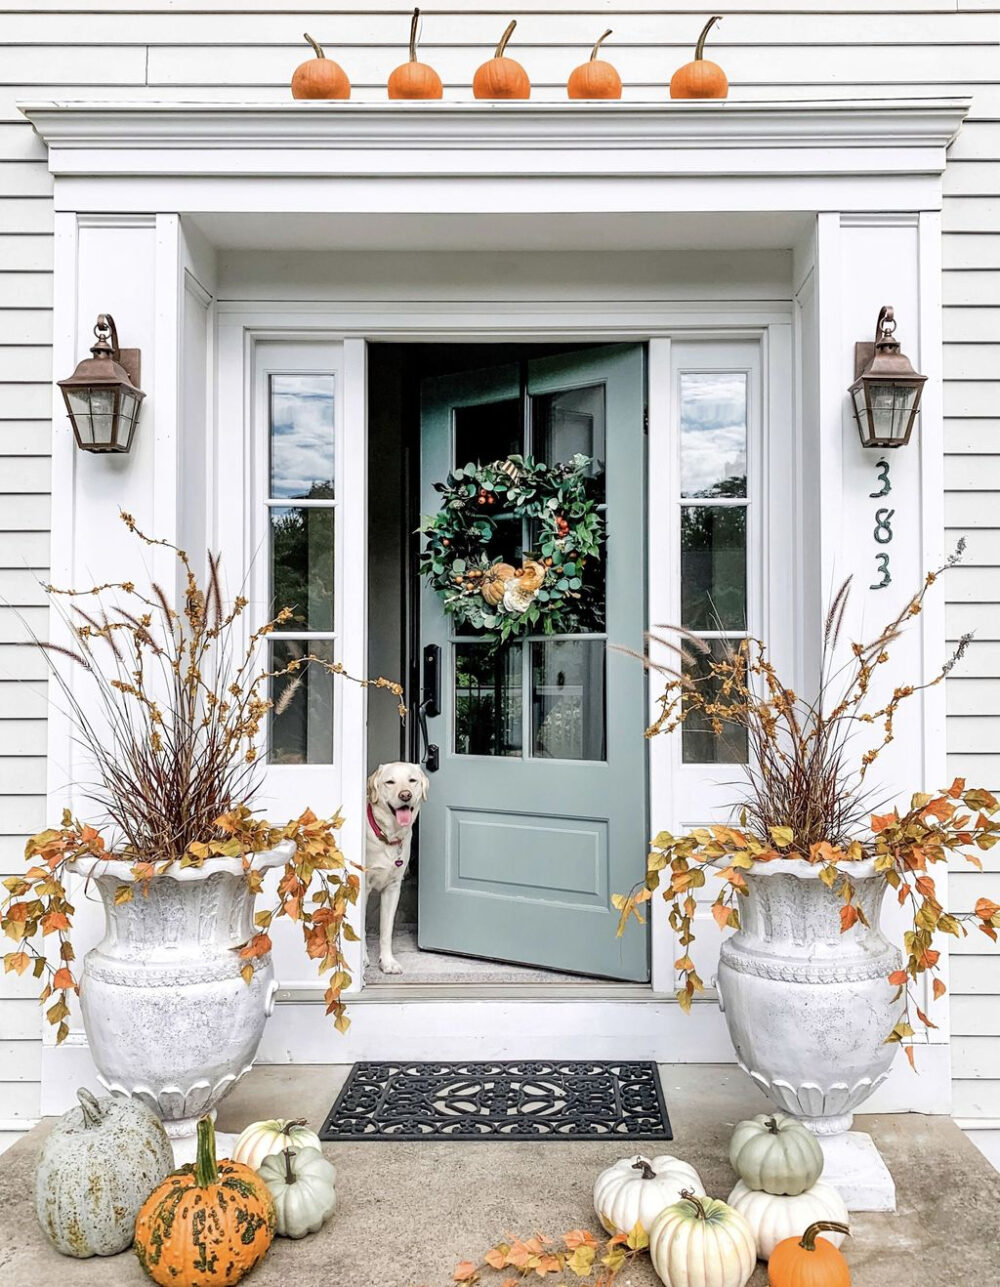 How To Get The Perfect Fall Door Decor In Minutes! thumbnail